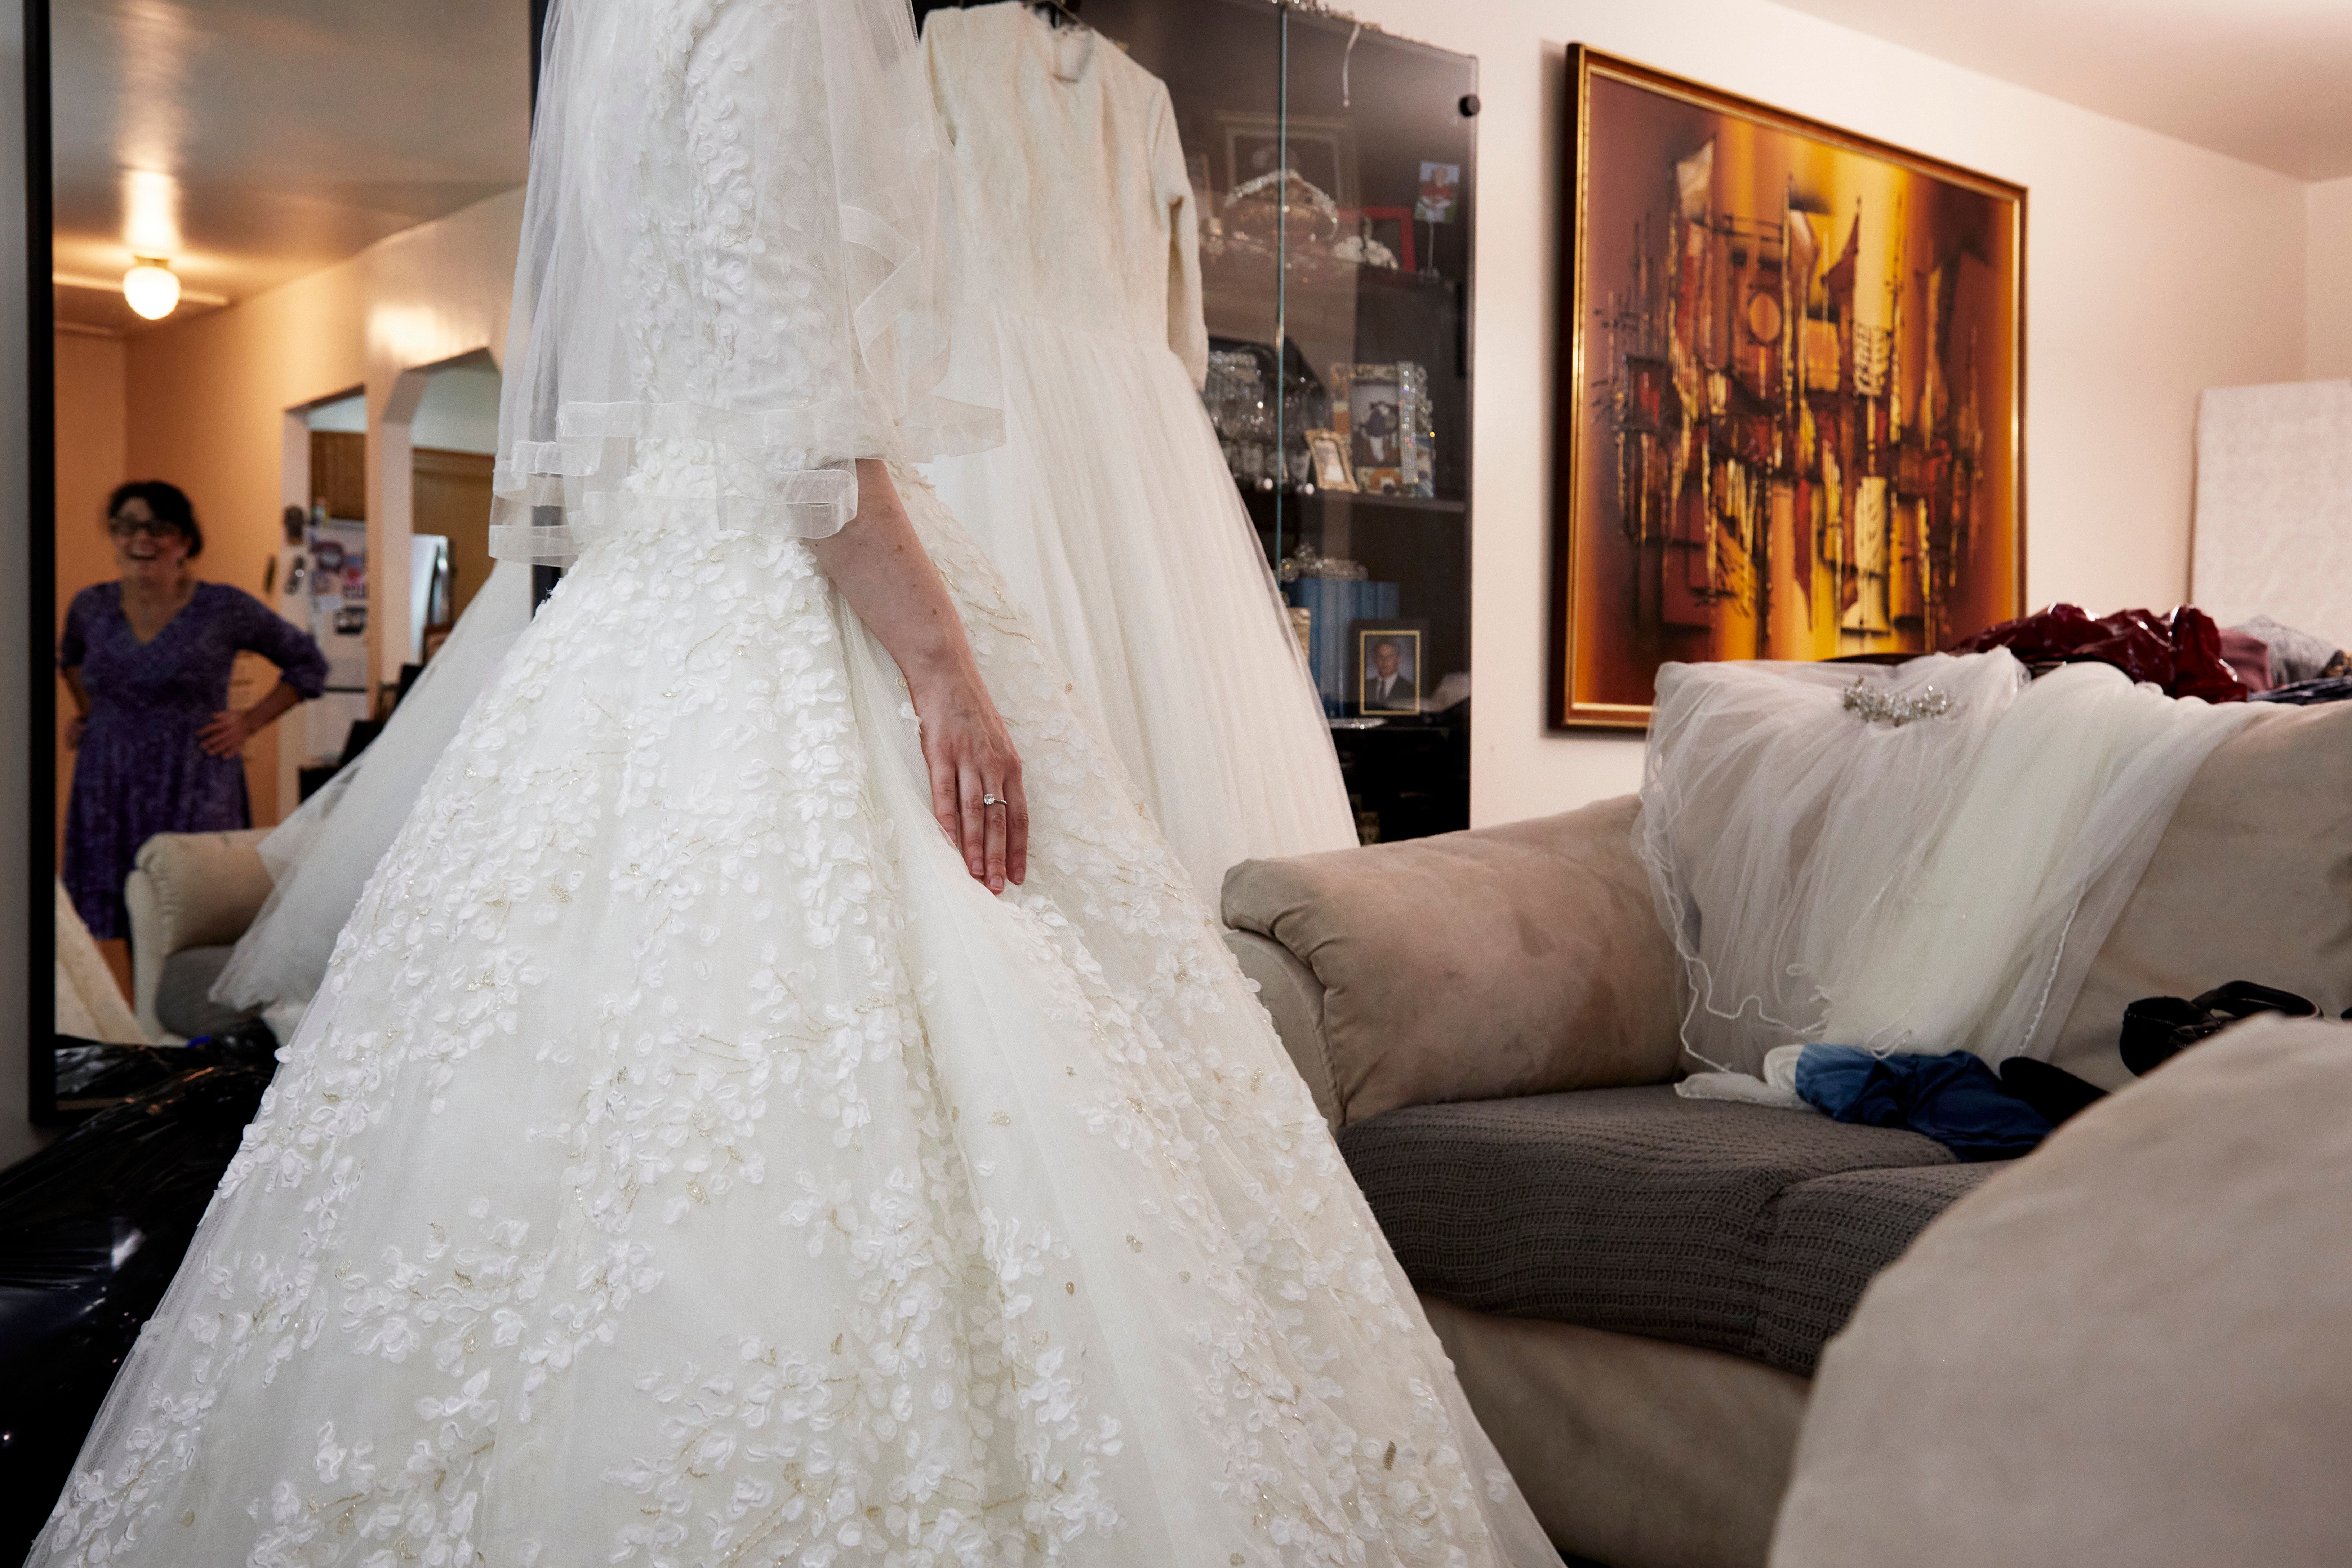 Pious Recycling Gives Wedding Gowns a Second Life - Tablet Magazine